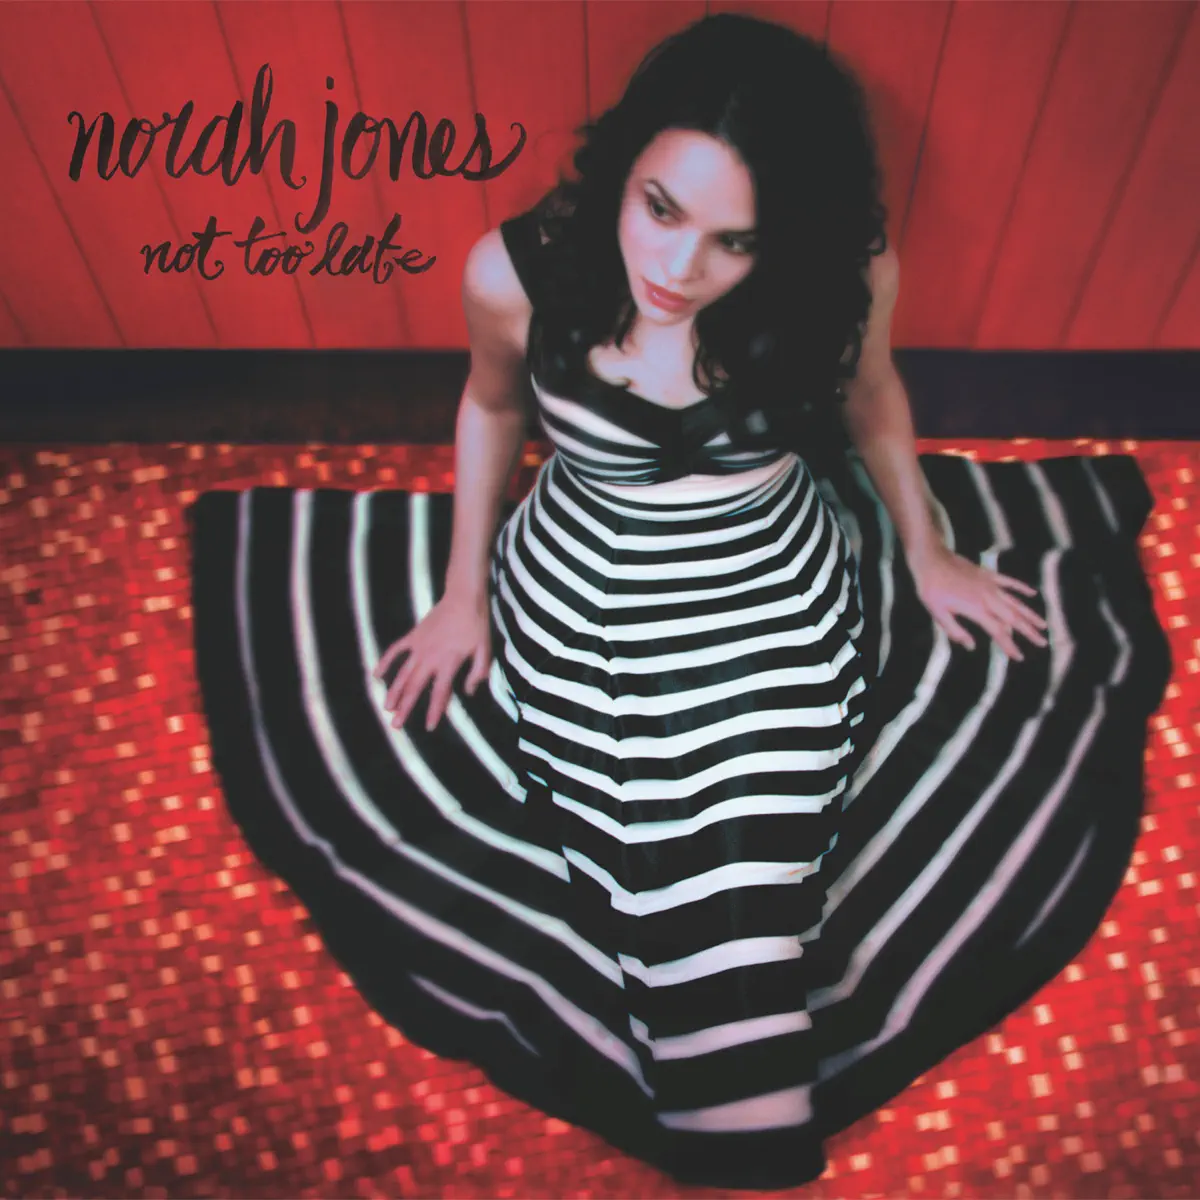 Norah Jones - Not Too Late (Deluxe Edition) (2007) [iTunes Plus AAC M4A]-新房子